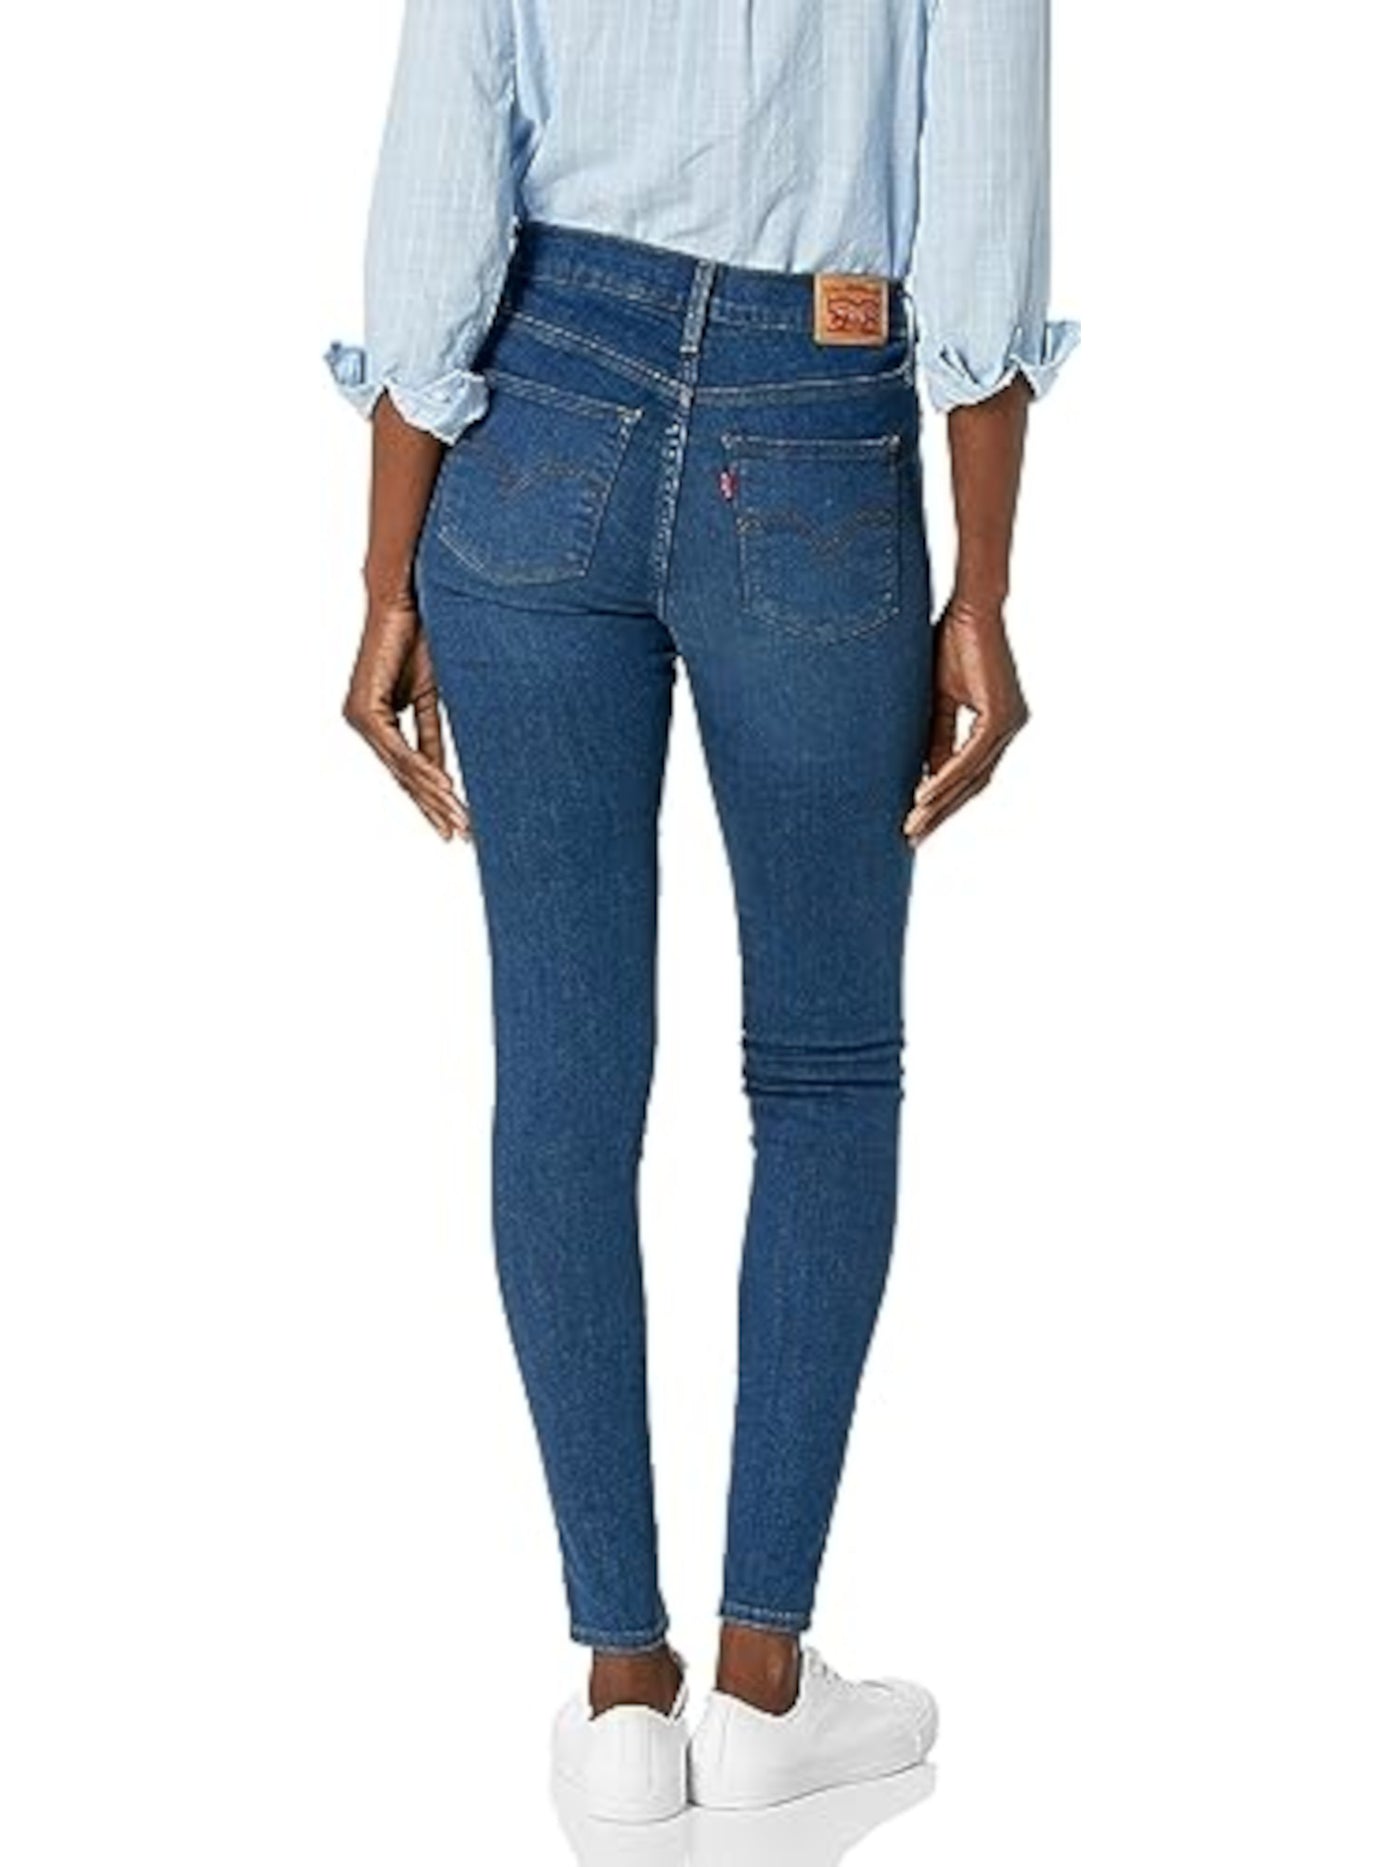 LEVI'S Womens Blue Pocketed Zippered Super Skinny Button Closure High Waist Jeans Plus 18W